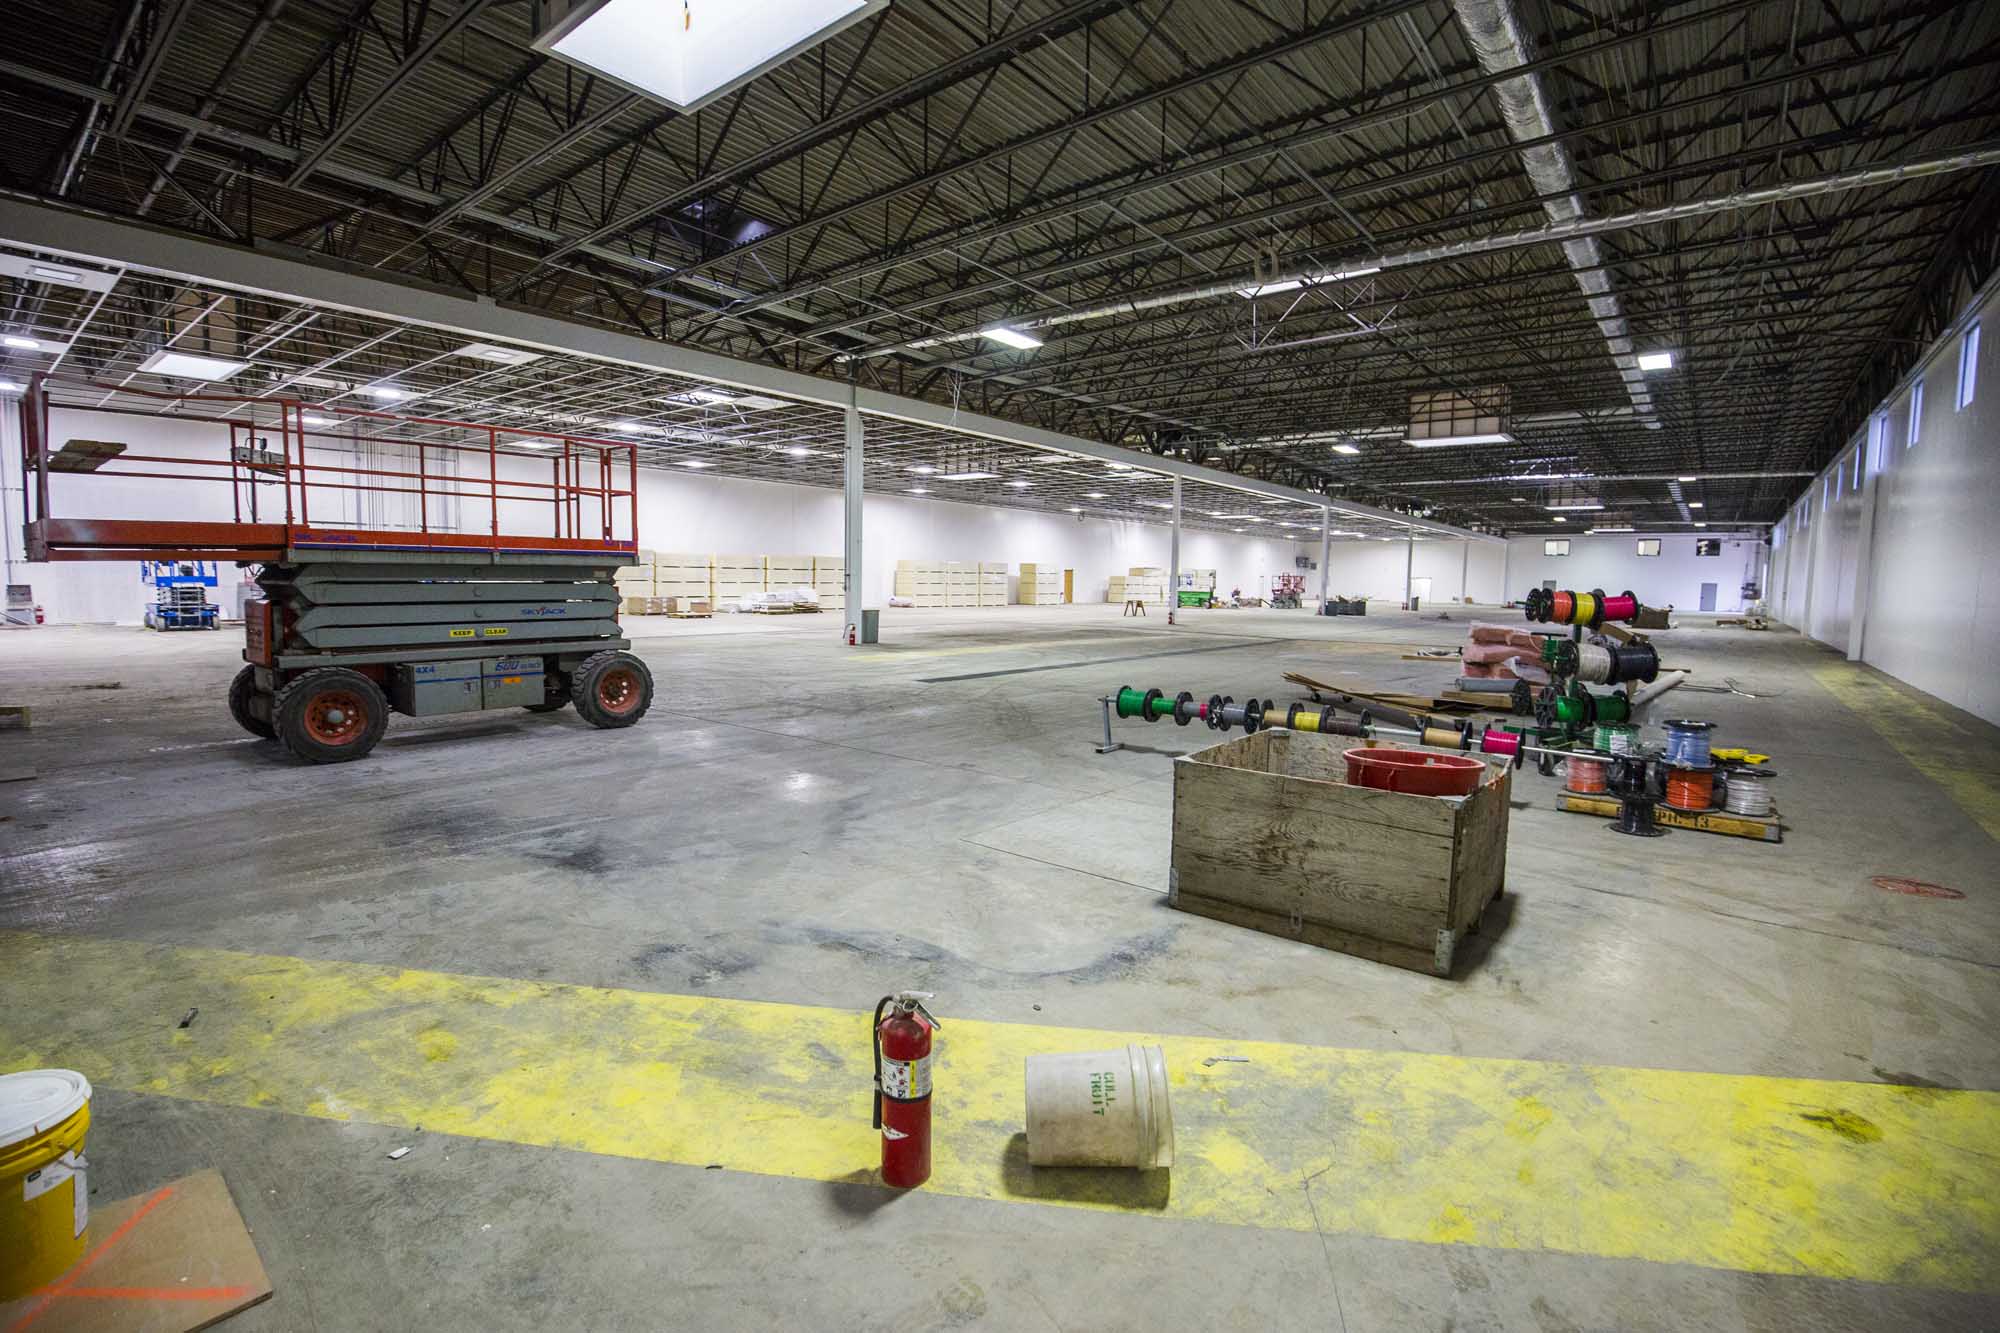 The new $17 million, 86,700-square-foot Legacy Fruit Packers apple packing facility under construction on February 11, 2015 in Wapato, Washington will be ready for the fall 2015 crop. (TJ Mullinax/Good Fruit Grower)